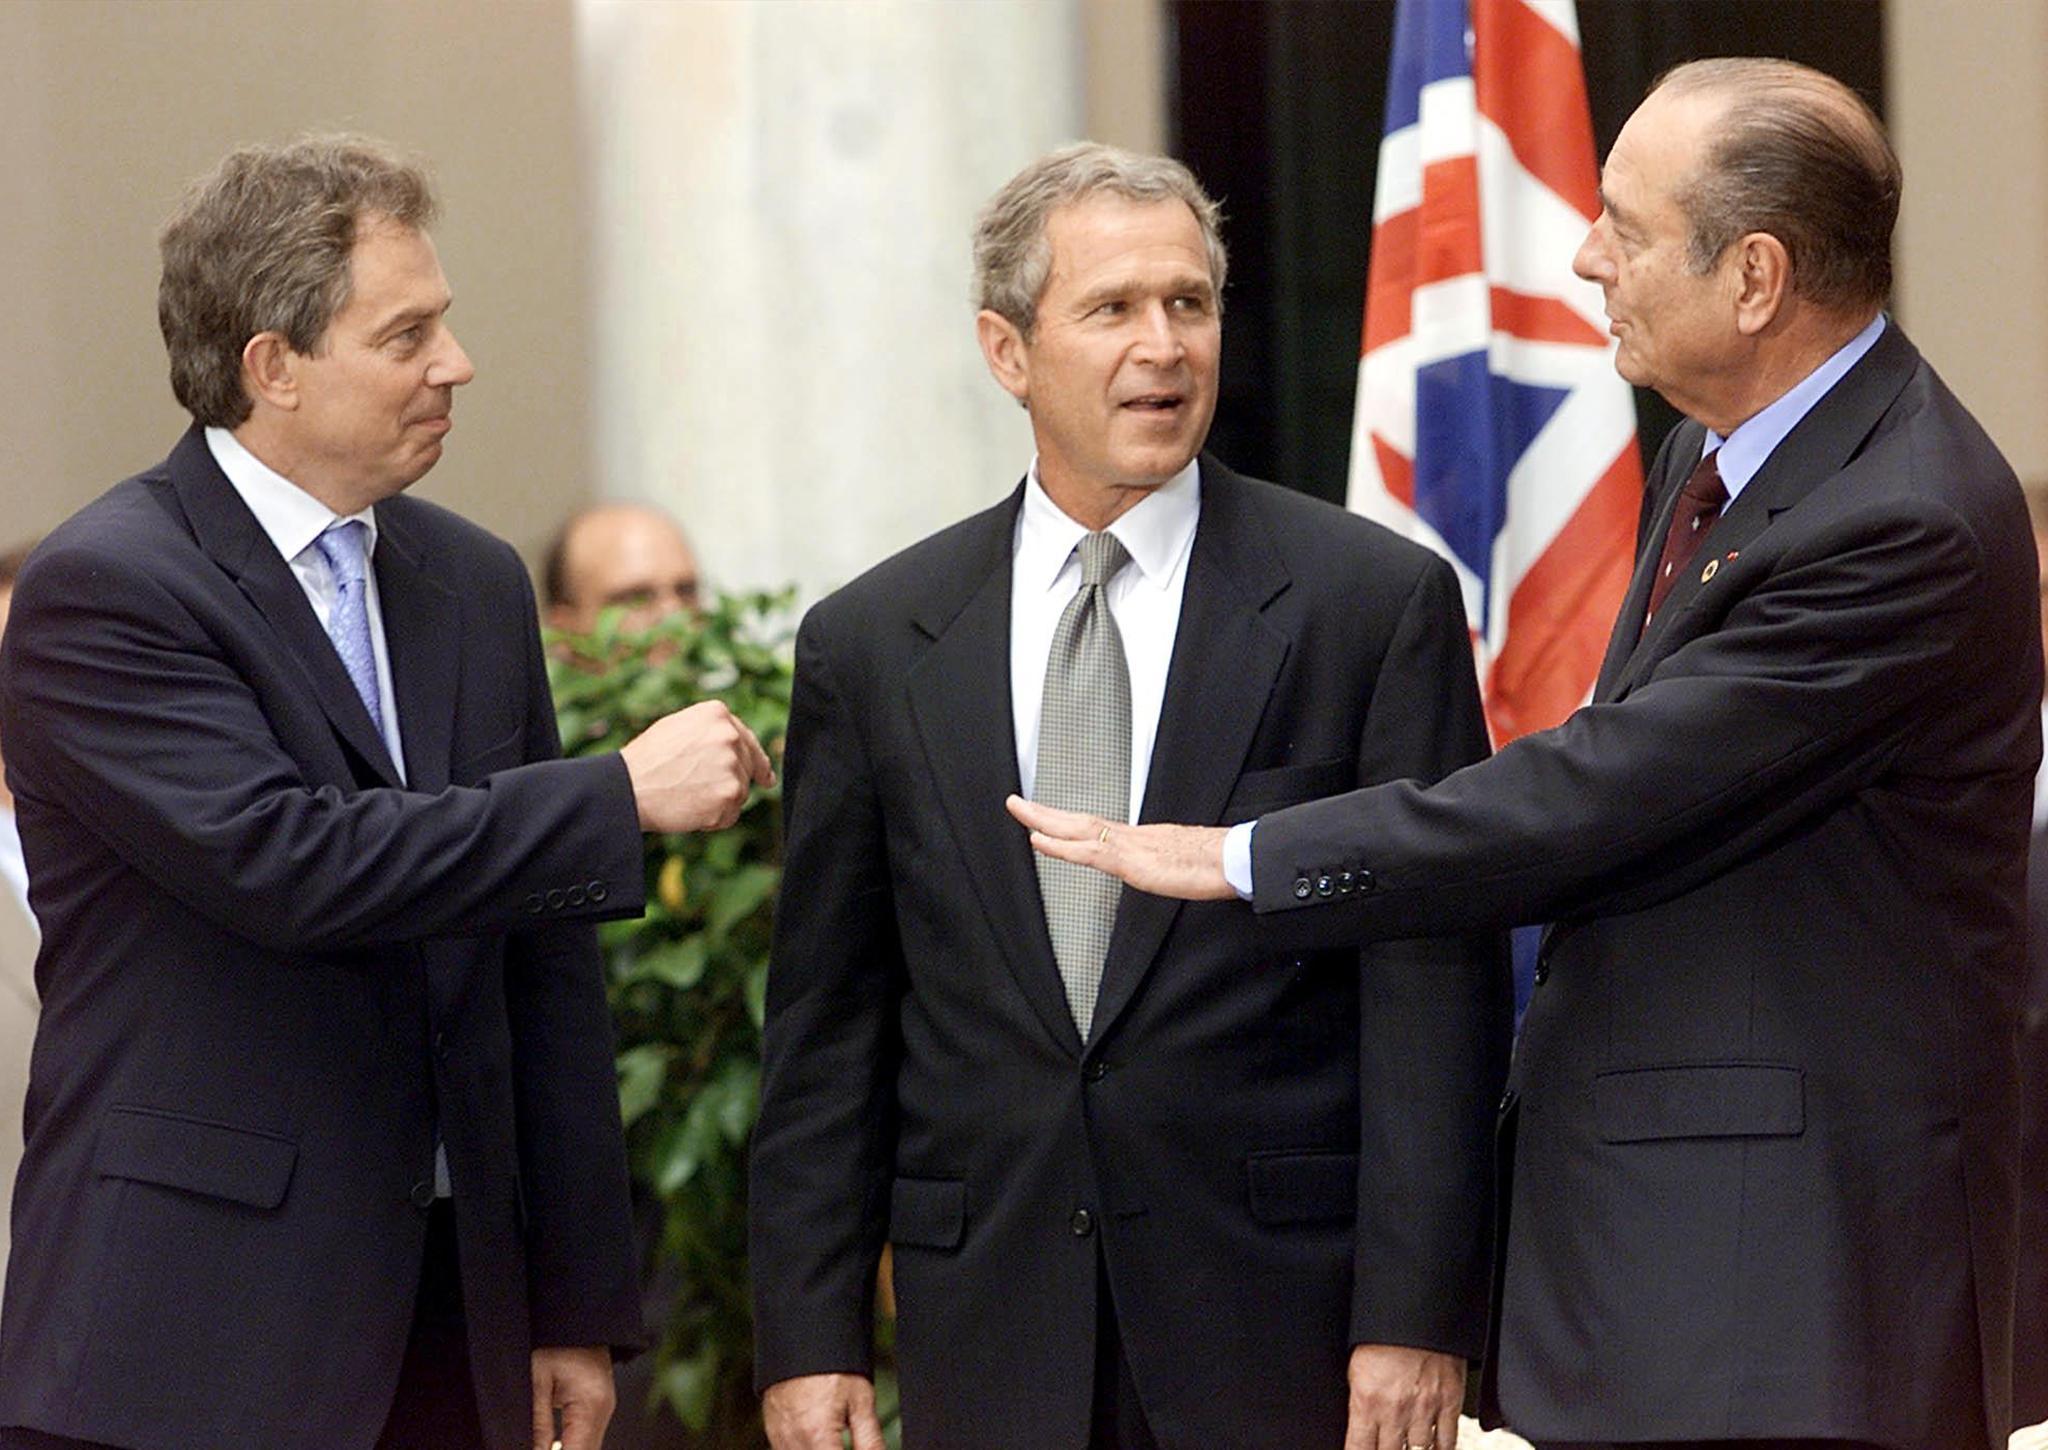 Jacques Chirac, George W Bush and Tony Blair talk on 20 July, 2001 in Genoa, Italy (STEPHEN JAFFE/AFP/Getty Images)